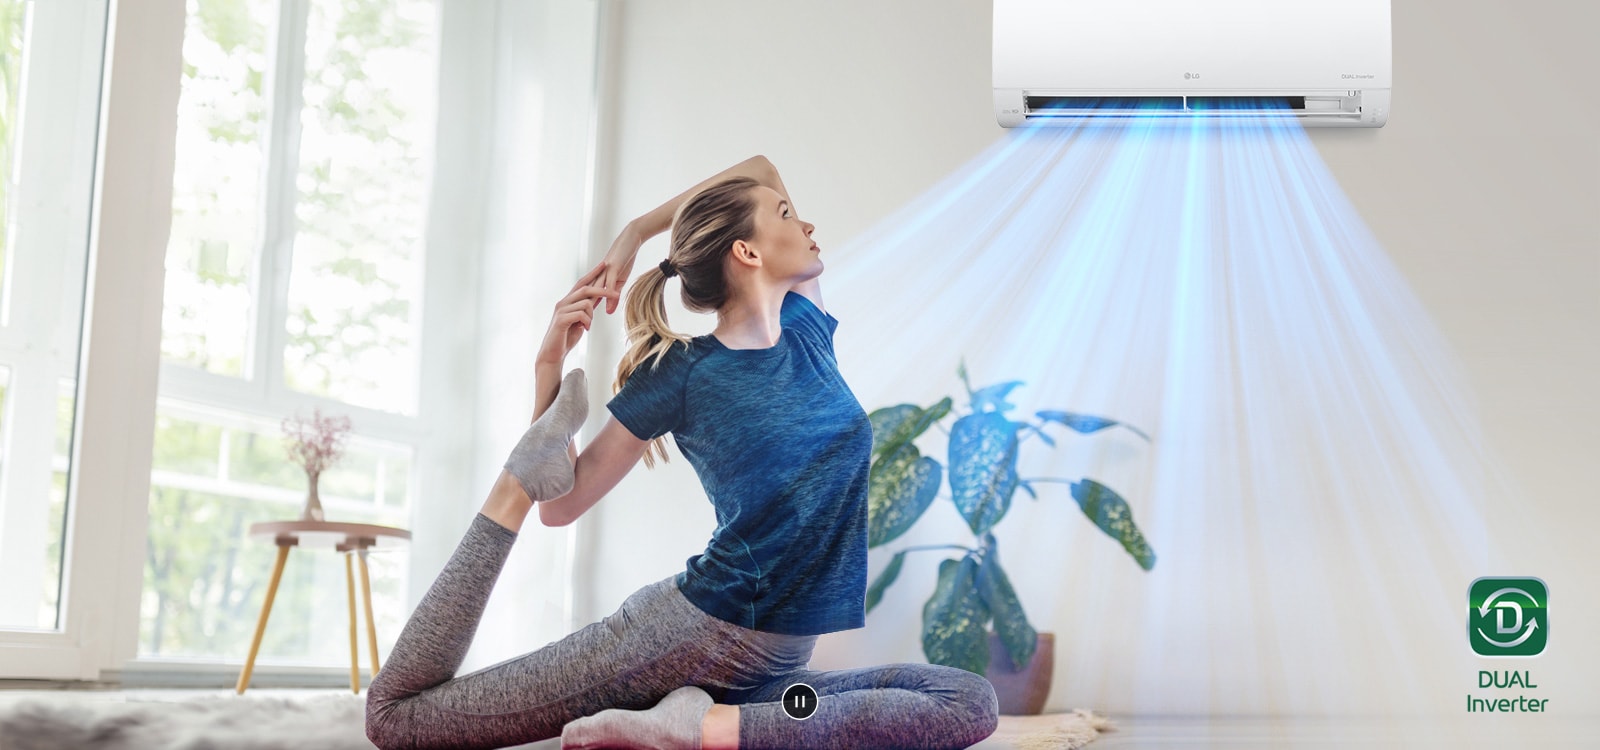 A woman is stretching on the floor. In the background is the air conditioner and blue air flows over the woman and the room. The Dual Inverter logo is in the lower right corner.